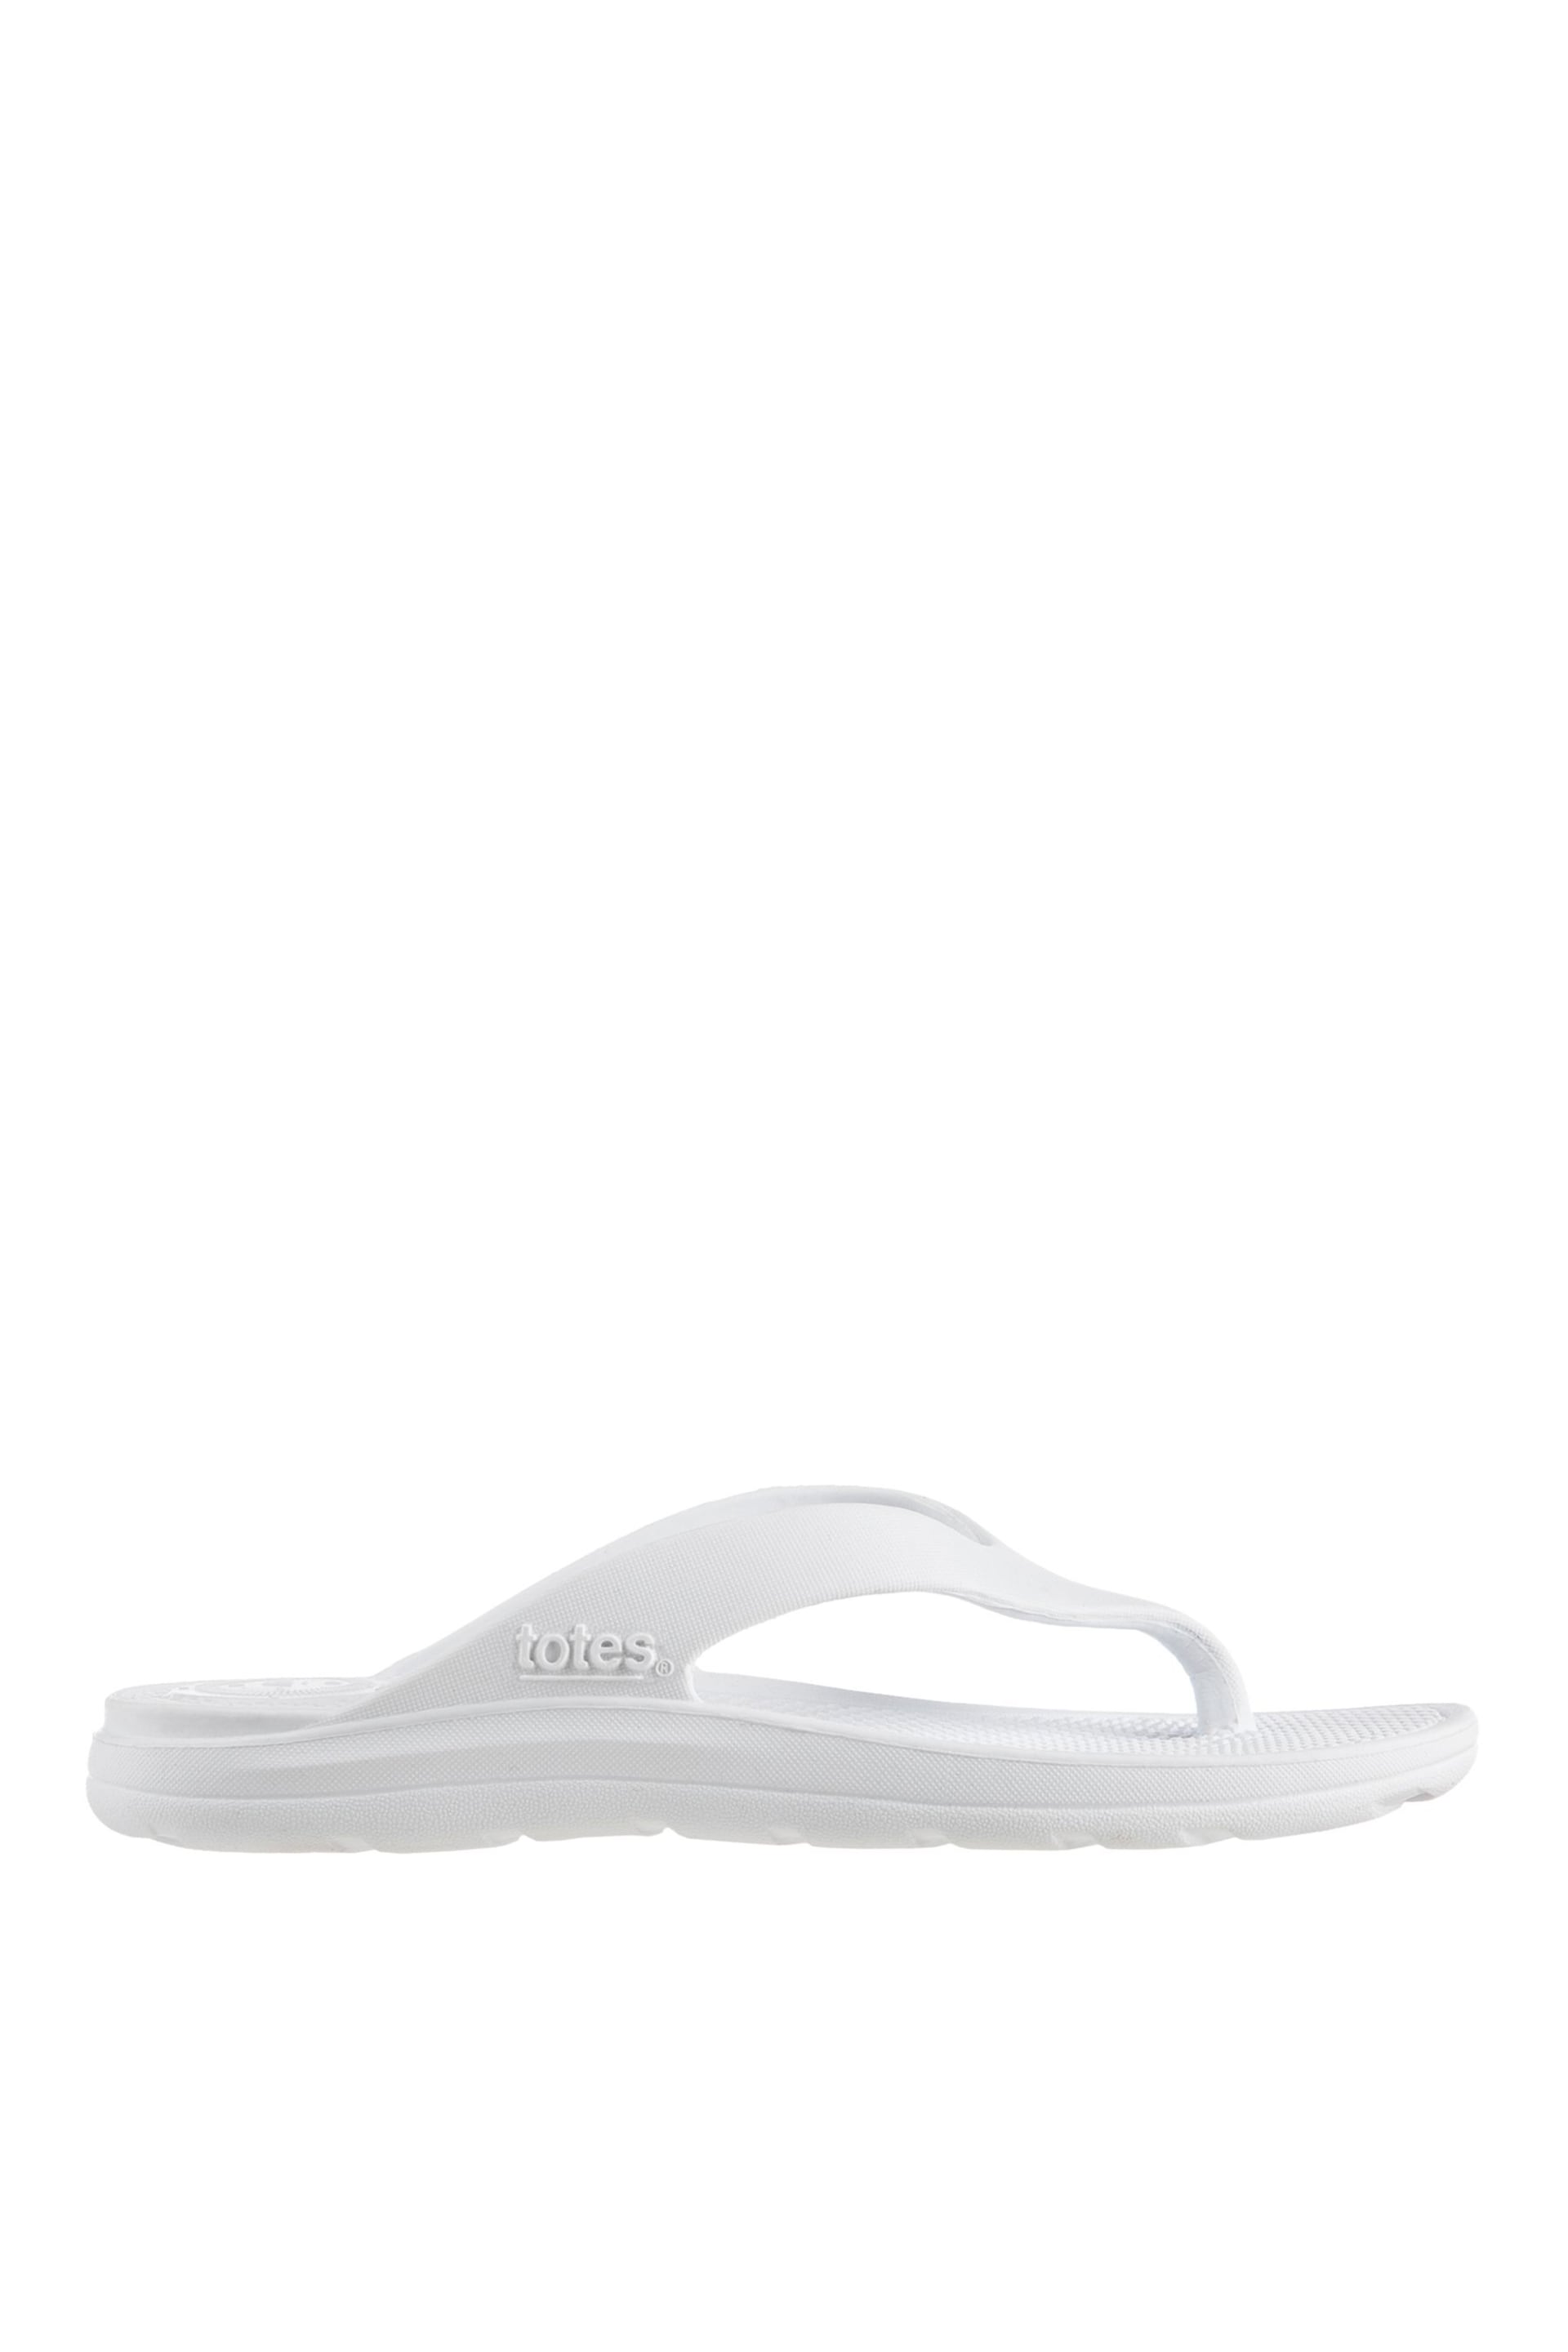 Totes White Ladies Solbounce Toe Post Flip Flops Sandals - Image 2 of 5